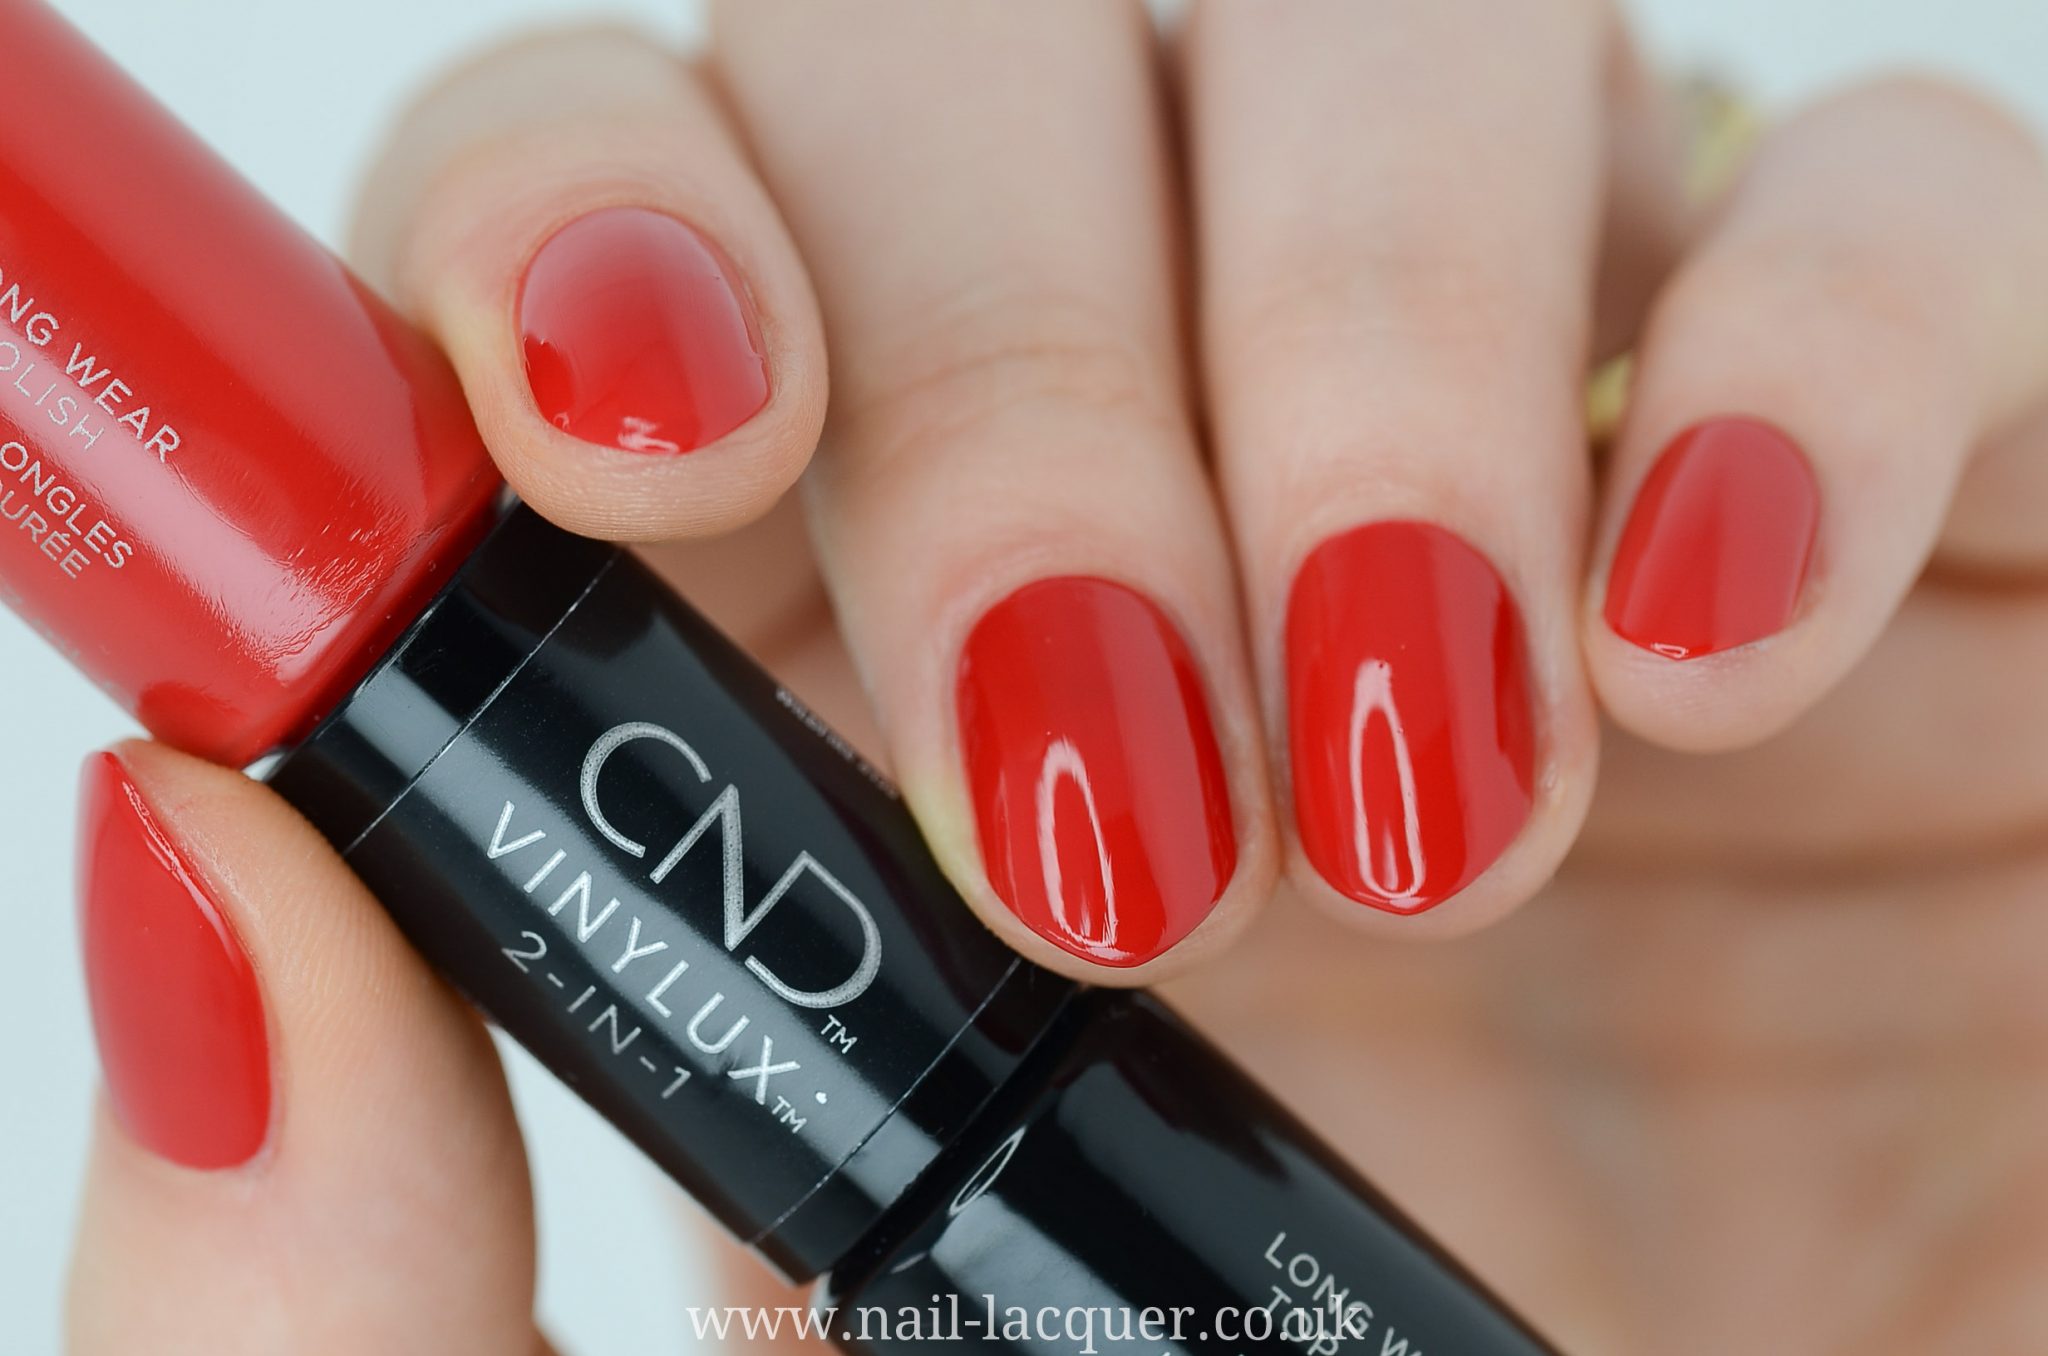 10. CND Vinylux Weekly Polish in "Wildfire" - wide 3